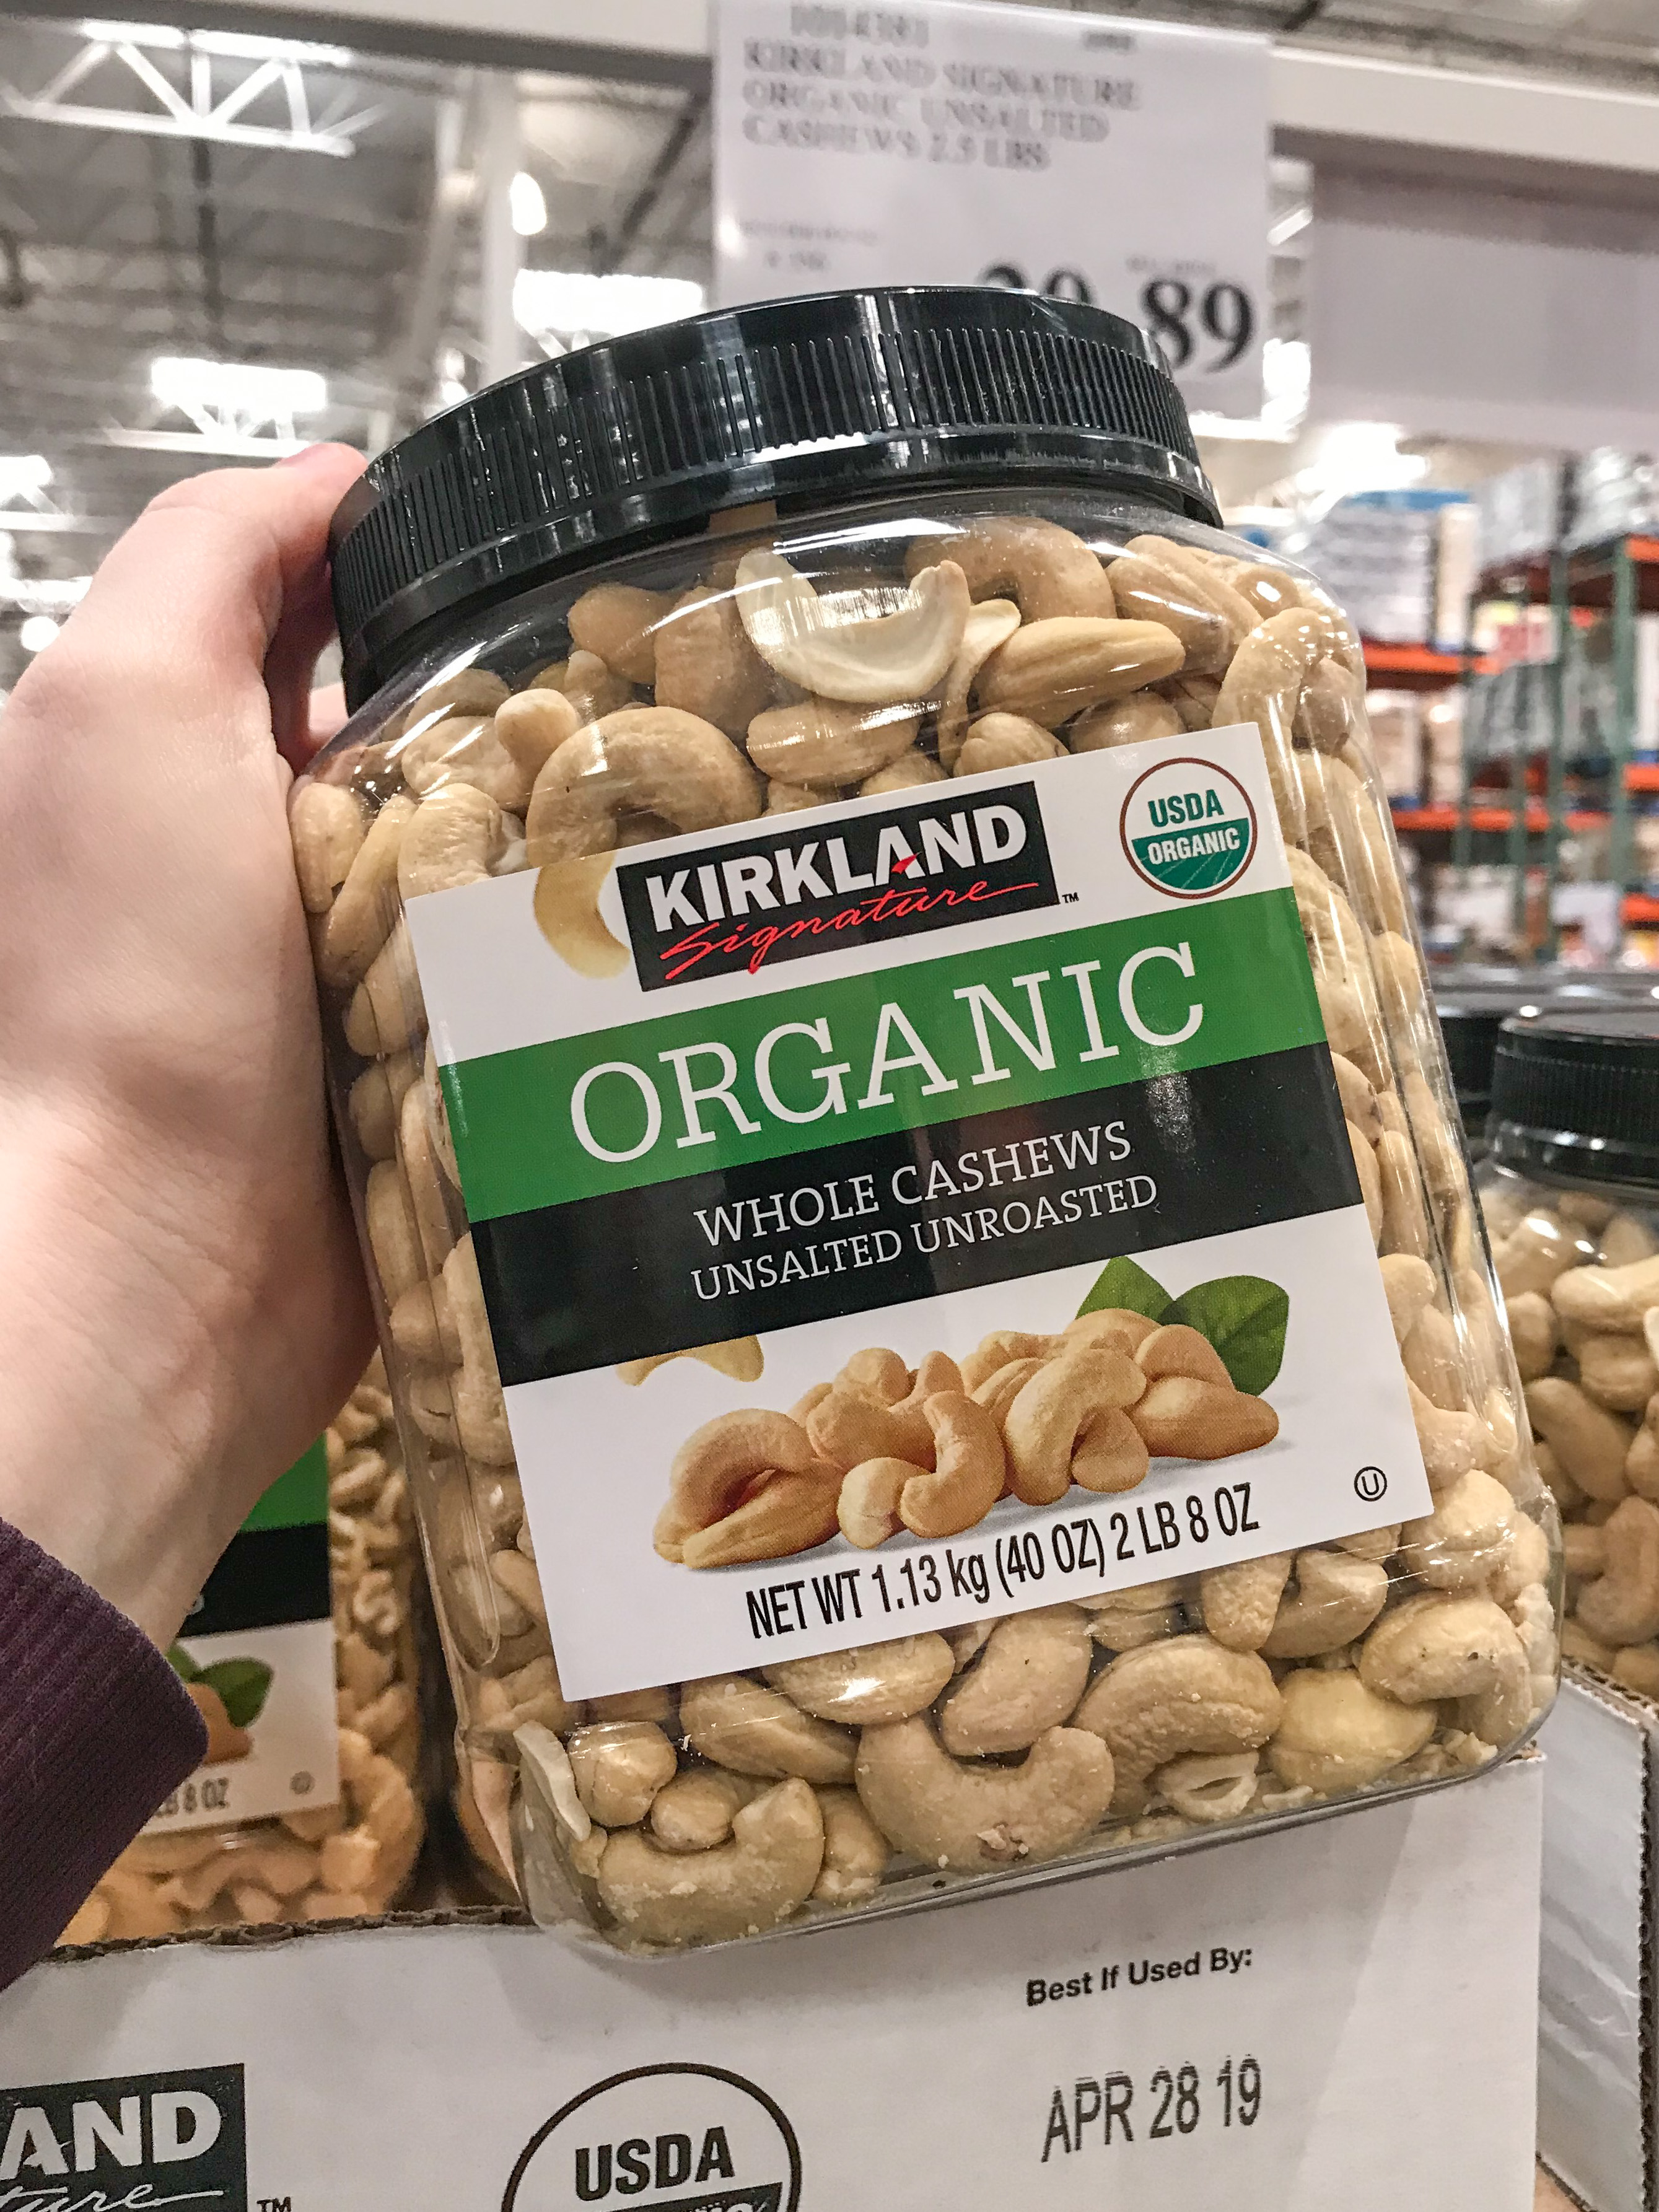 Nuts are one of the best snacks to buy at costco